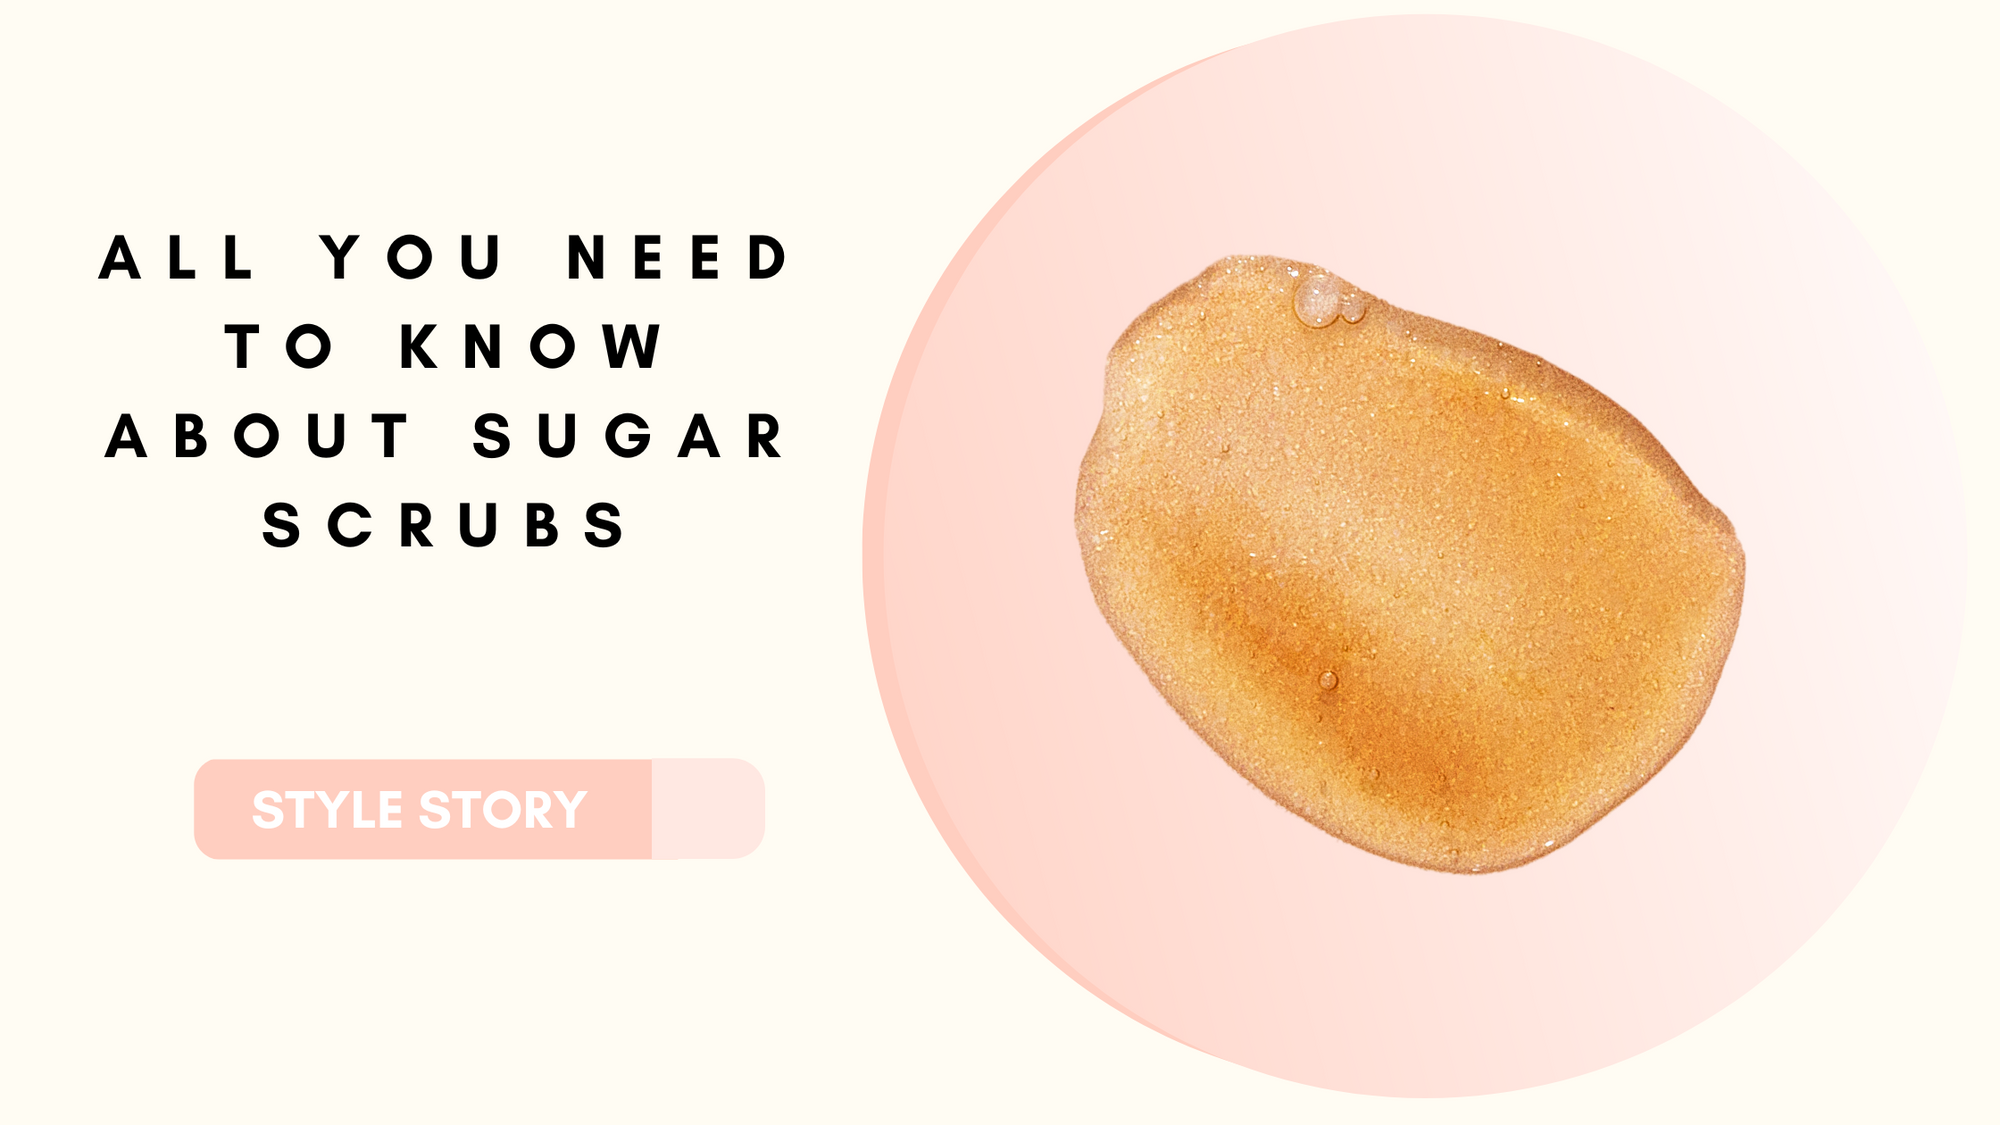 All You Need to Know About Sugar Scrubs